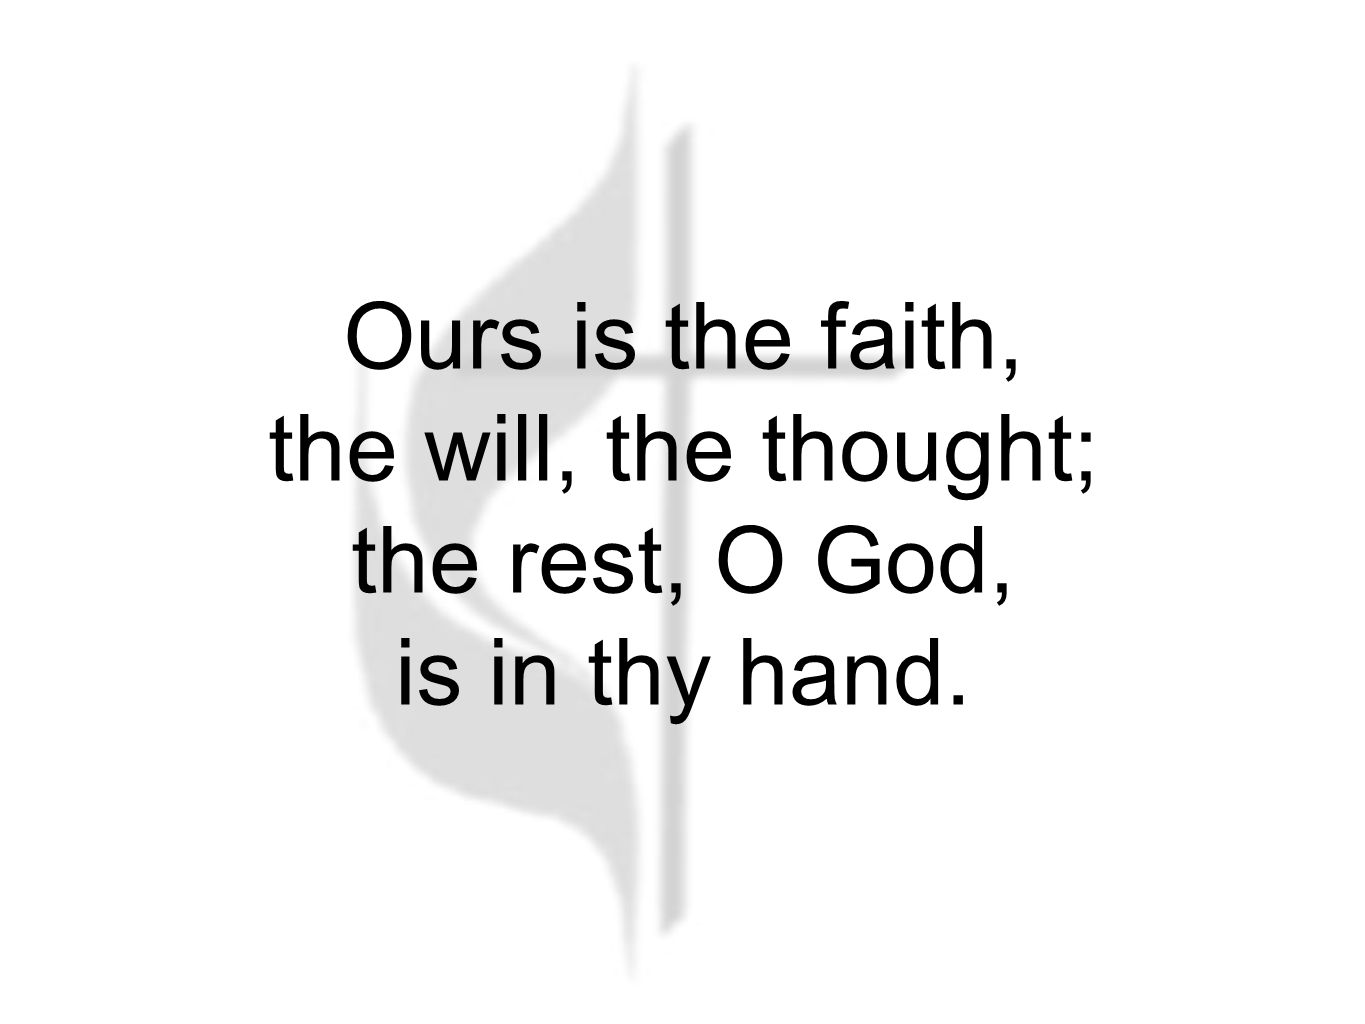 Ours is the faith, the will, the thought; the rest, O God, is in thy hand.